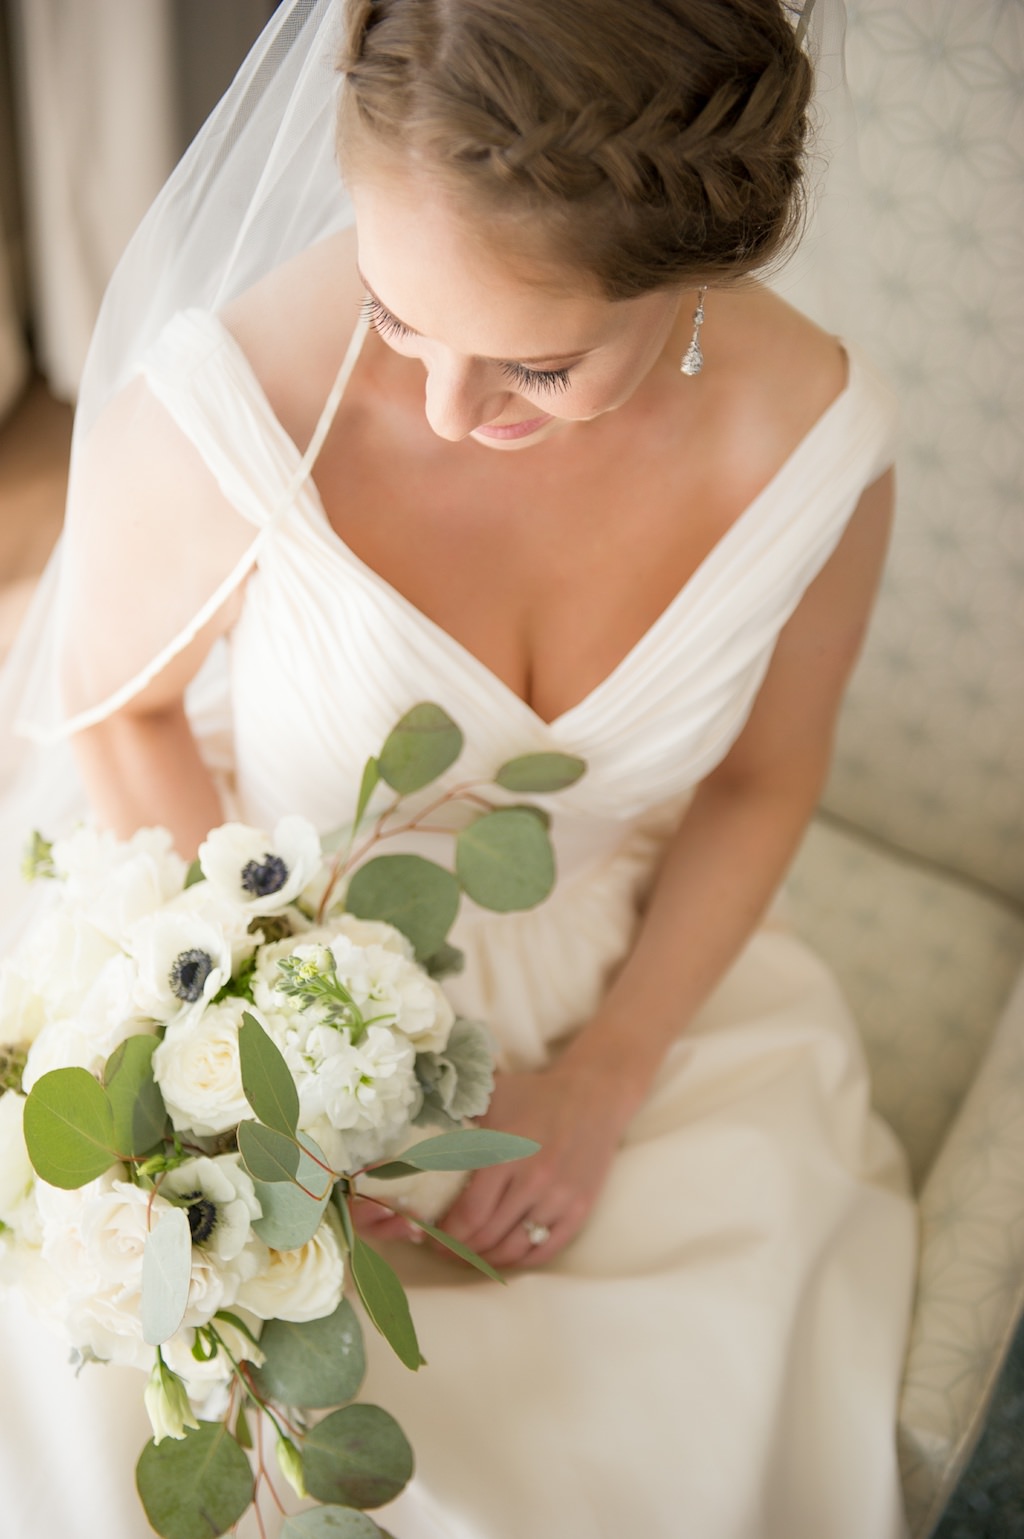 Bride in Classic Makeup with Braid Updo | Clearwater Beach Wedding Photographer Andi Diamond Photography | Hair and Makeup Artist Femme Akoi Beauty Studio